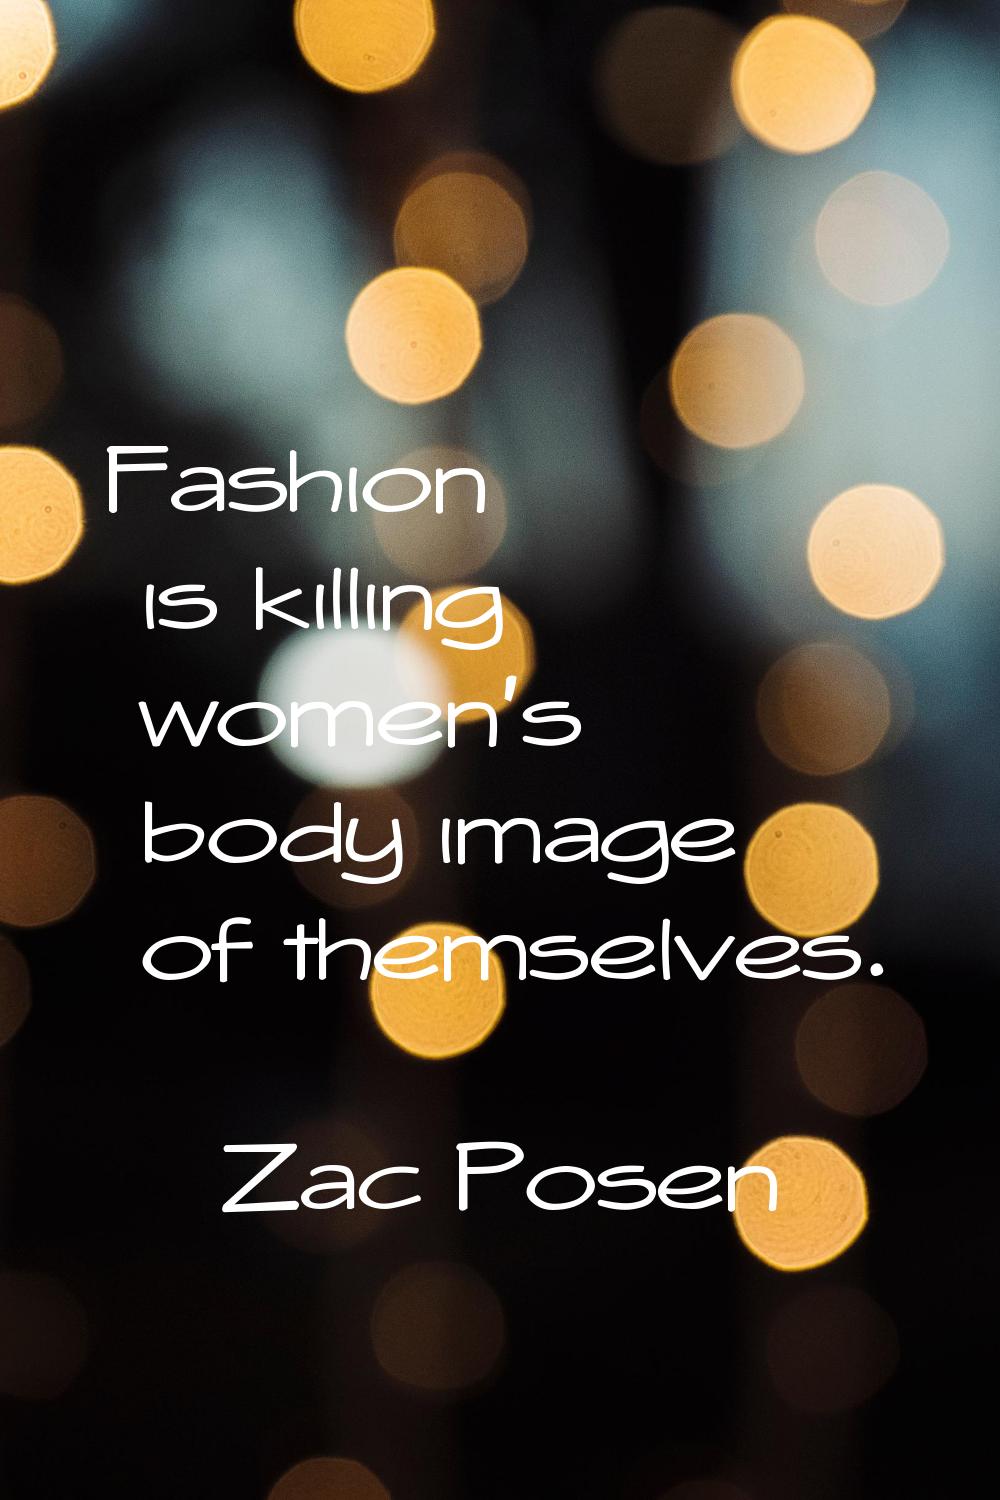 Fashion is killing women's body image of themselves.